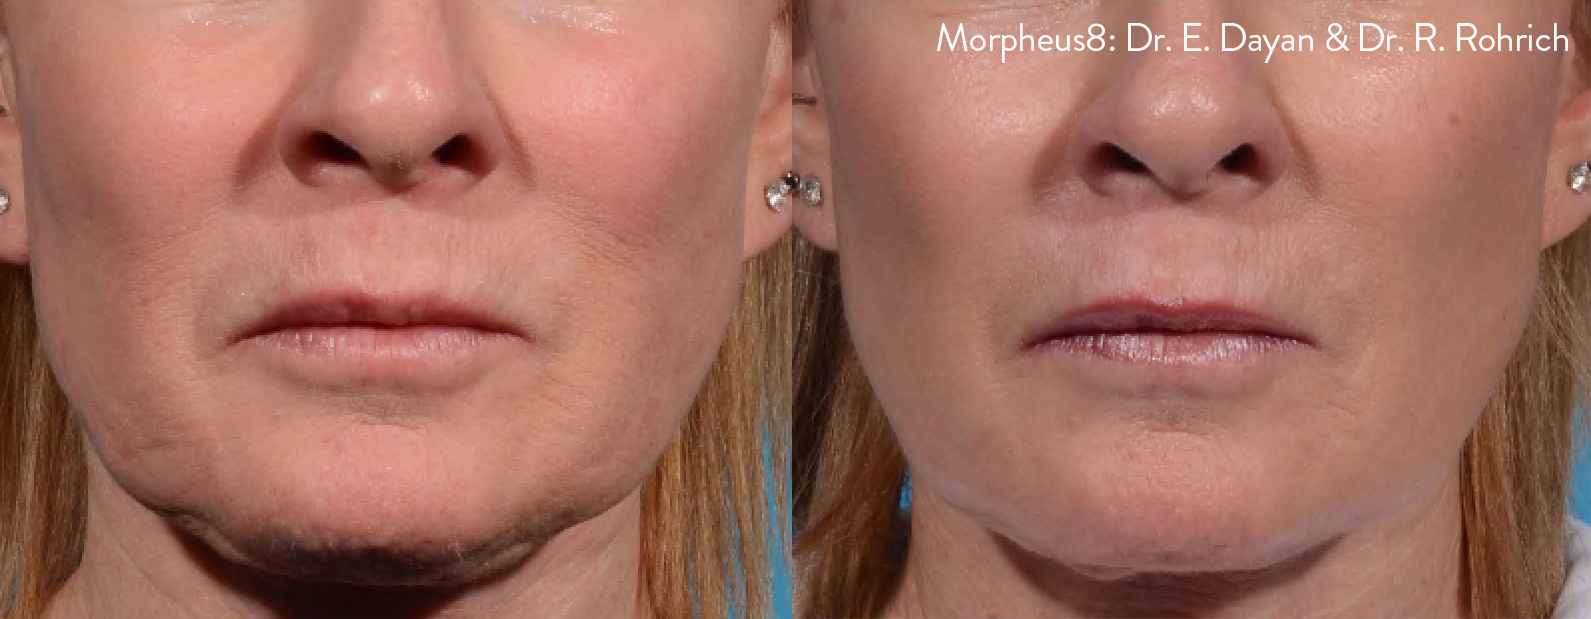 Before/after of tightened skin from Morpheus8